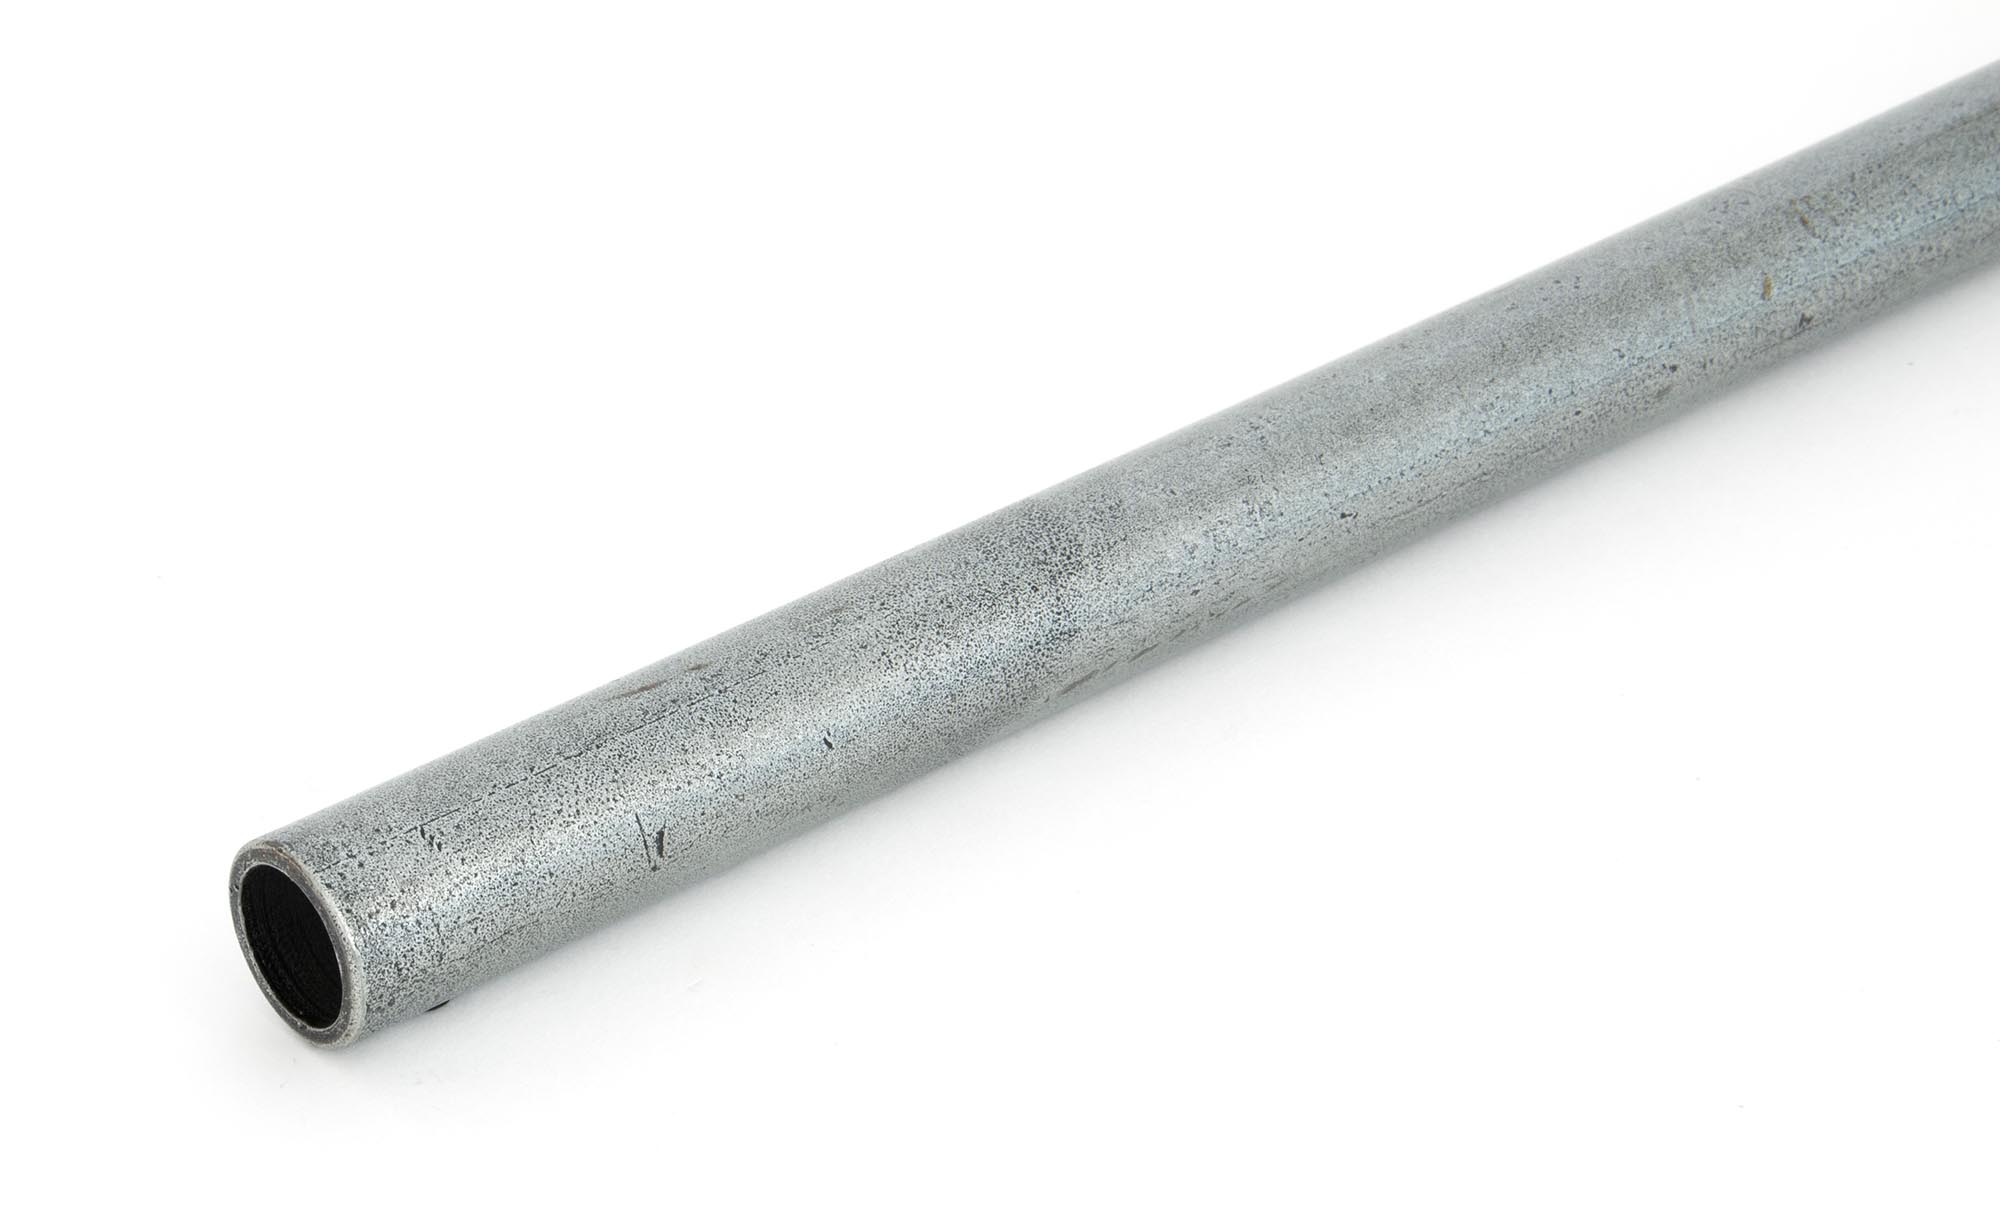 Pewter 1m Curtain Pole